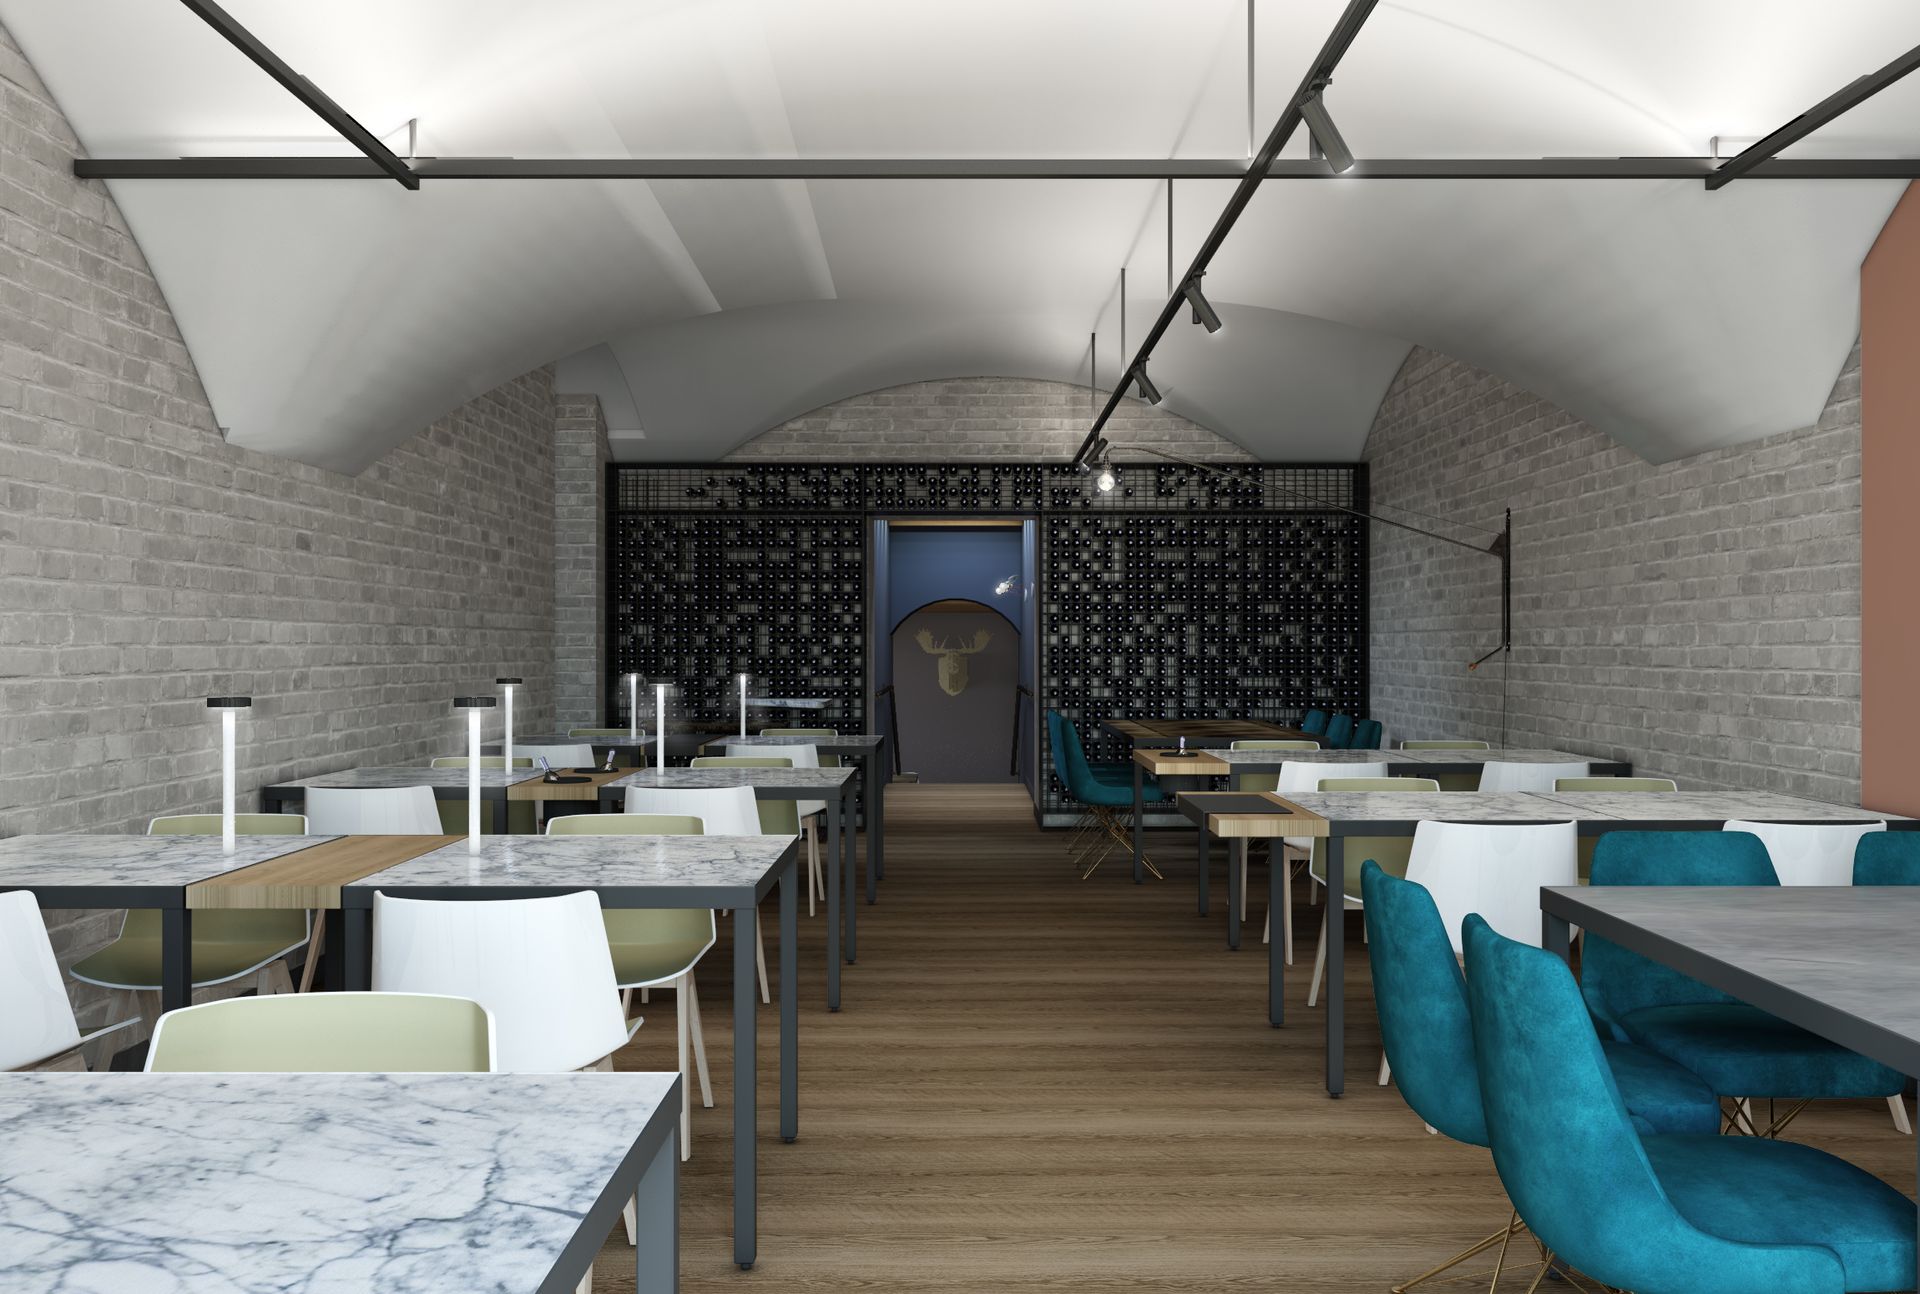 Interior design project, bistrot restaurant renovation with barrel vaults, exposed bricks and convivium table. Officina Magisafi architecture design - main room